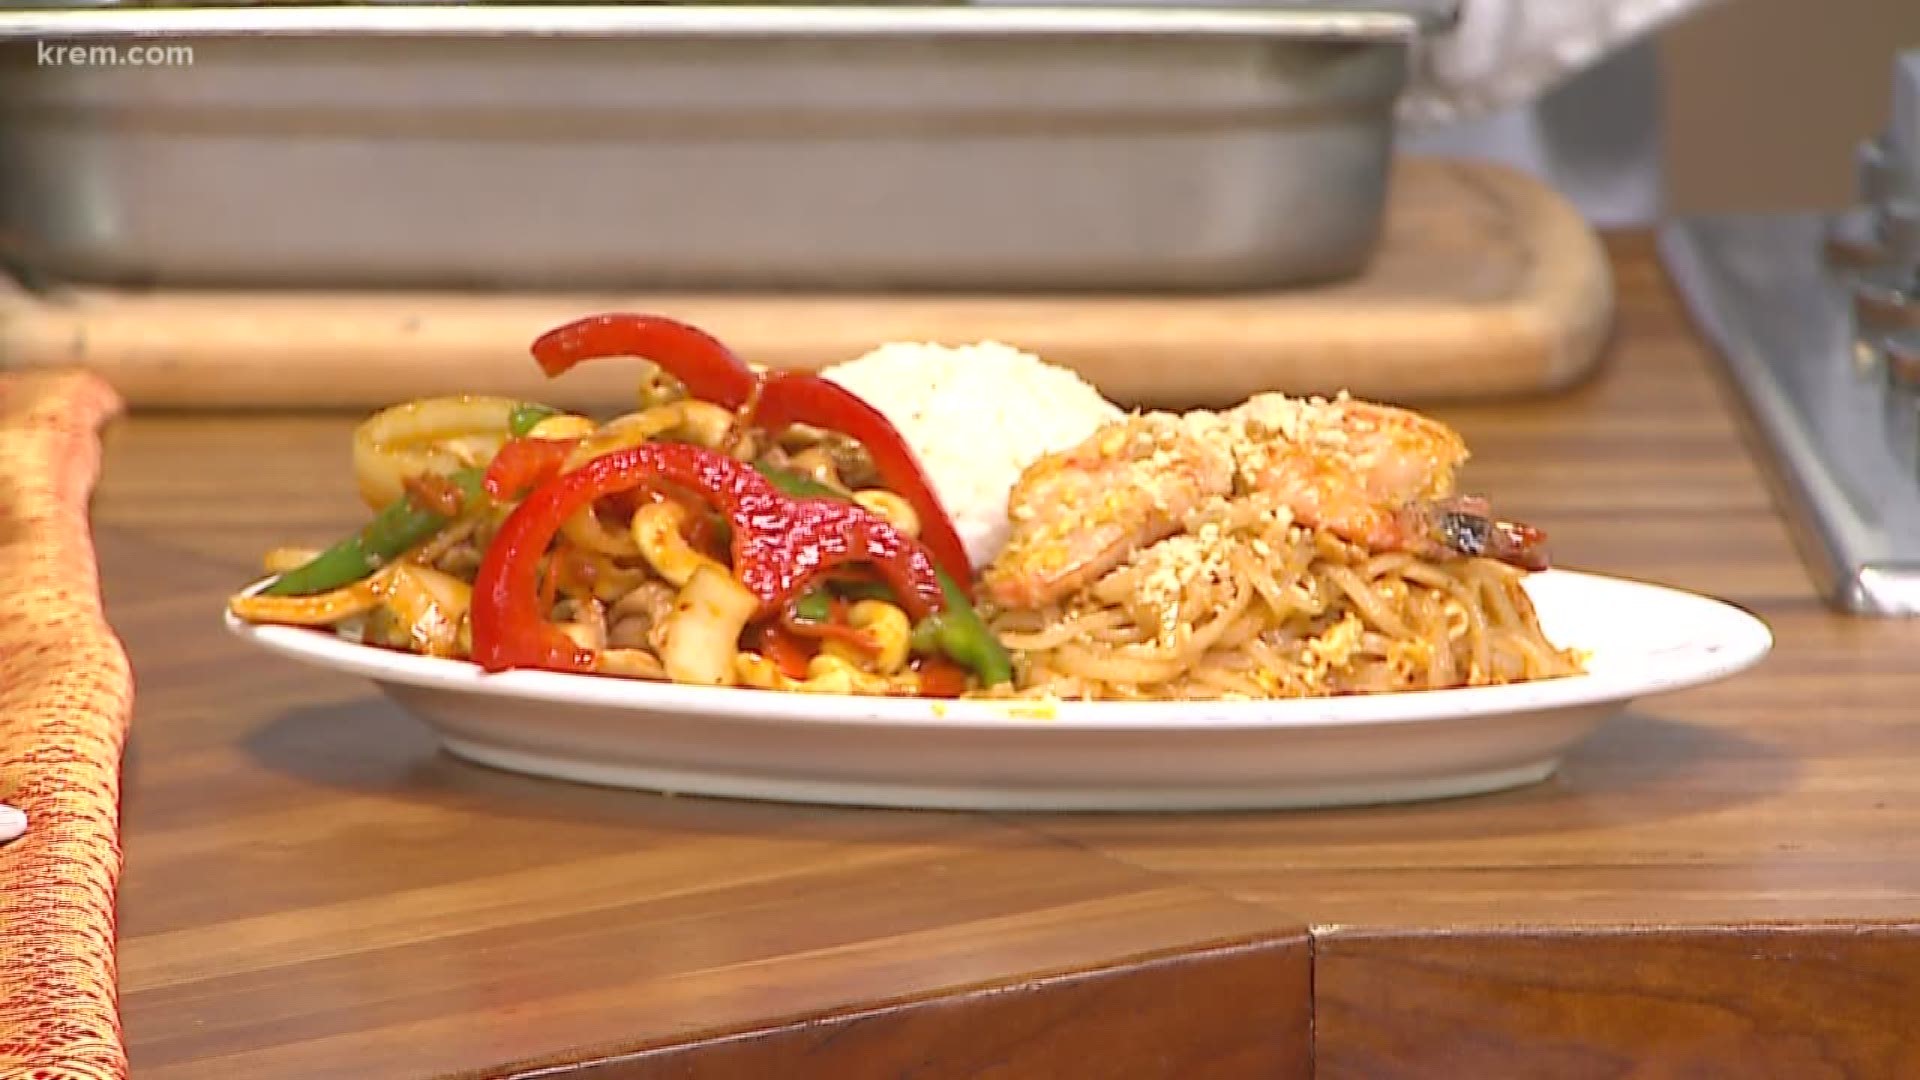 KREM's Jen York and Evan Noorani are in the kitchen with a preview of the Restaurant Week meny at Thai Bamboo.